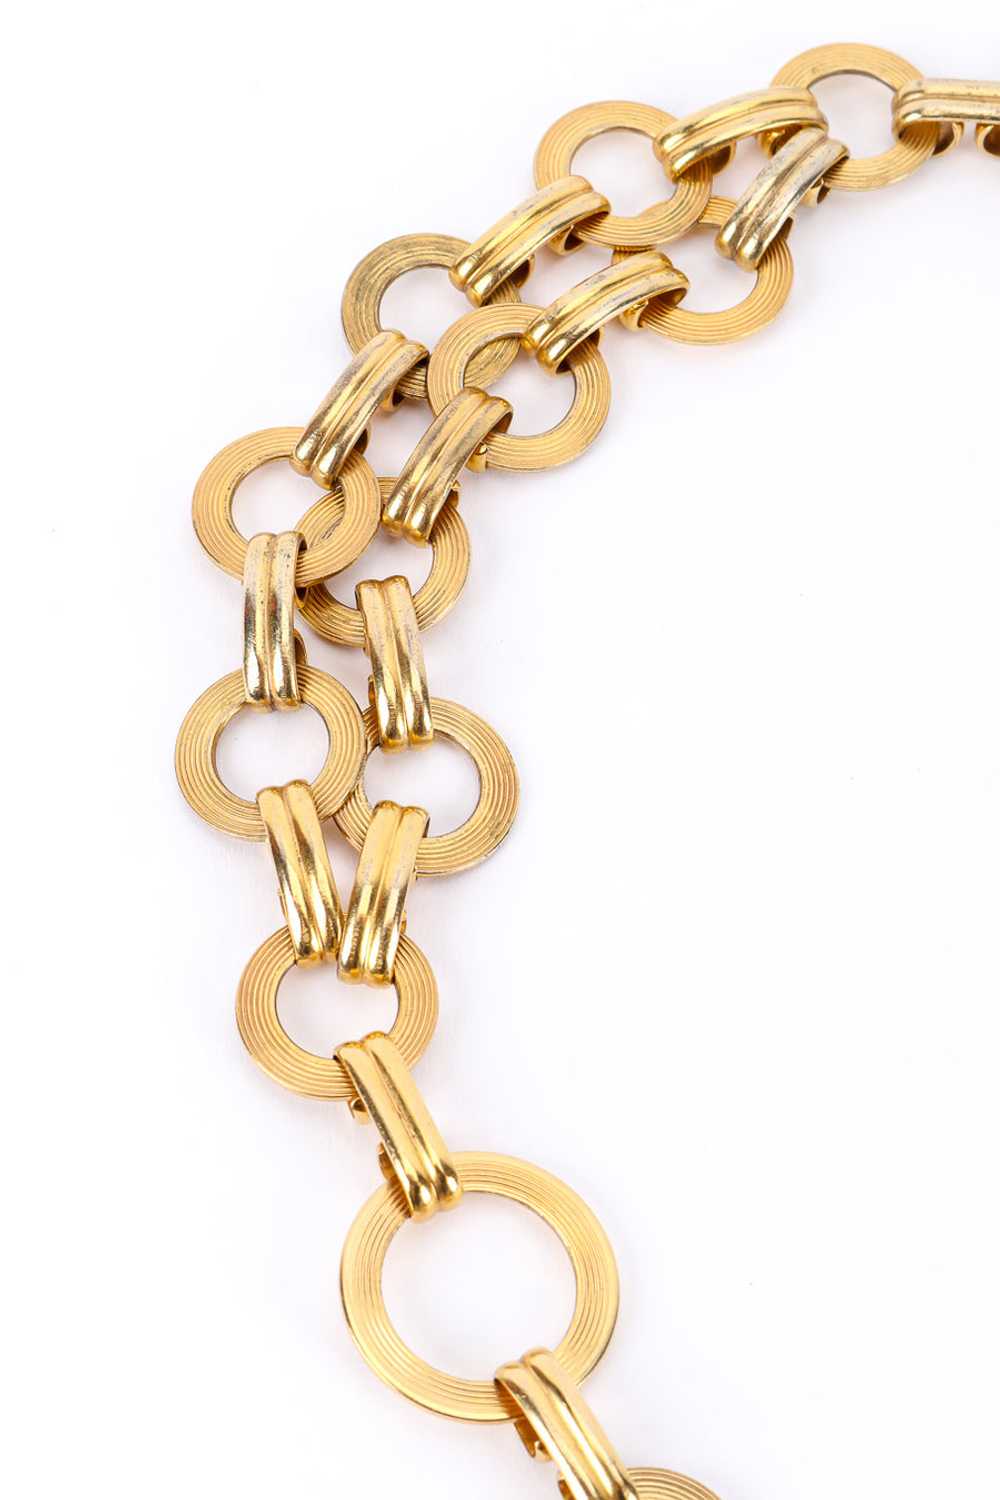 YSL Double Disc Chain Belt - image 4